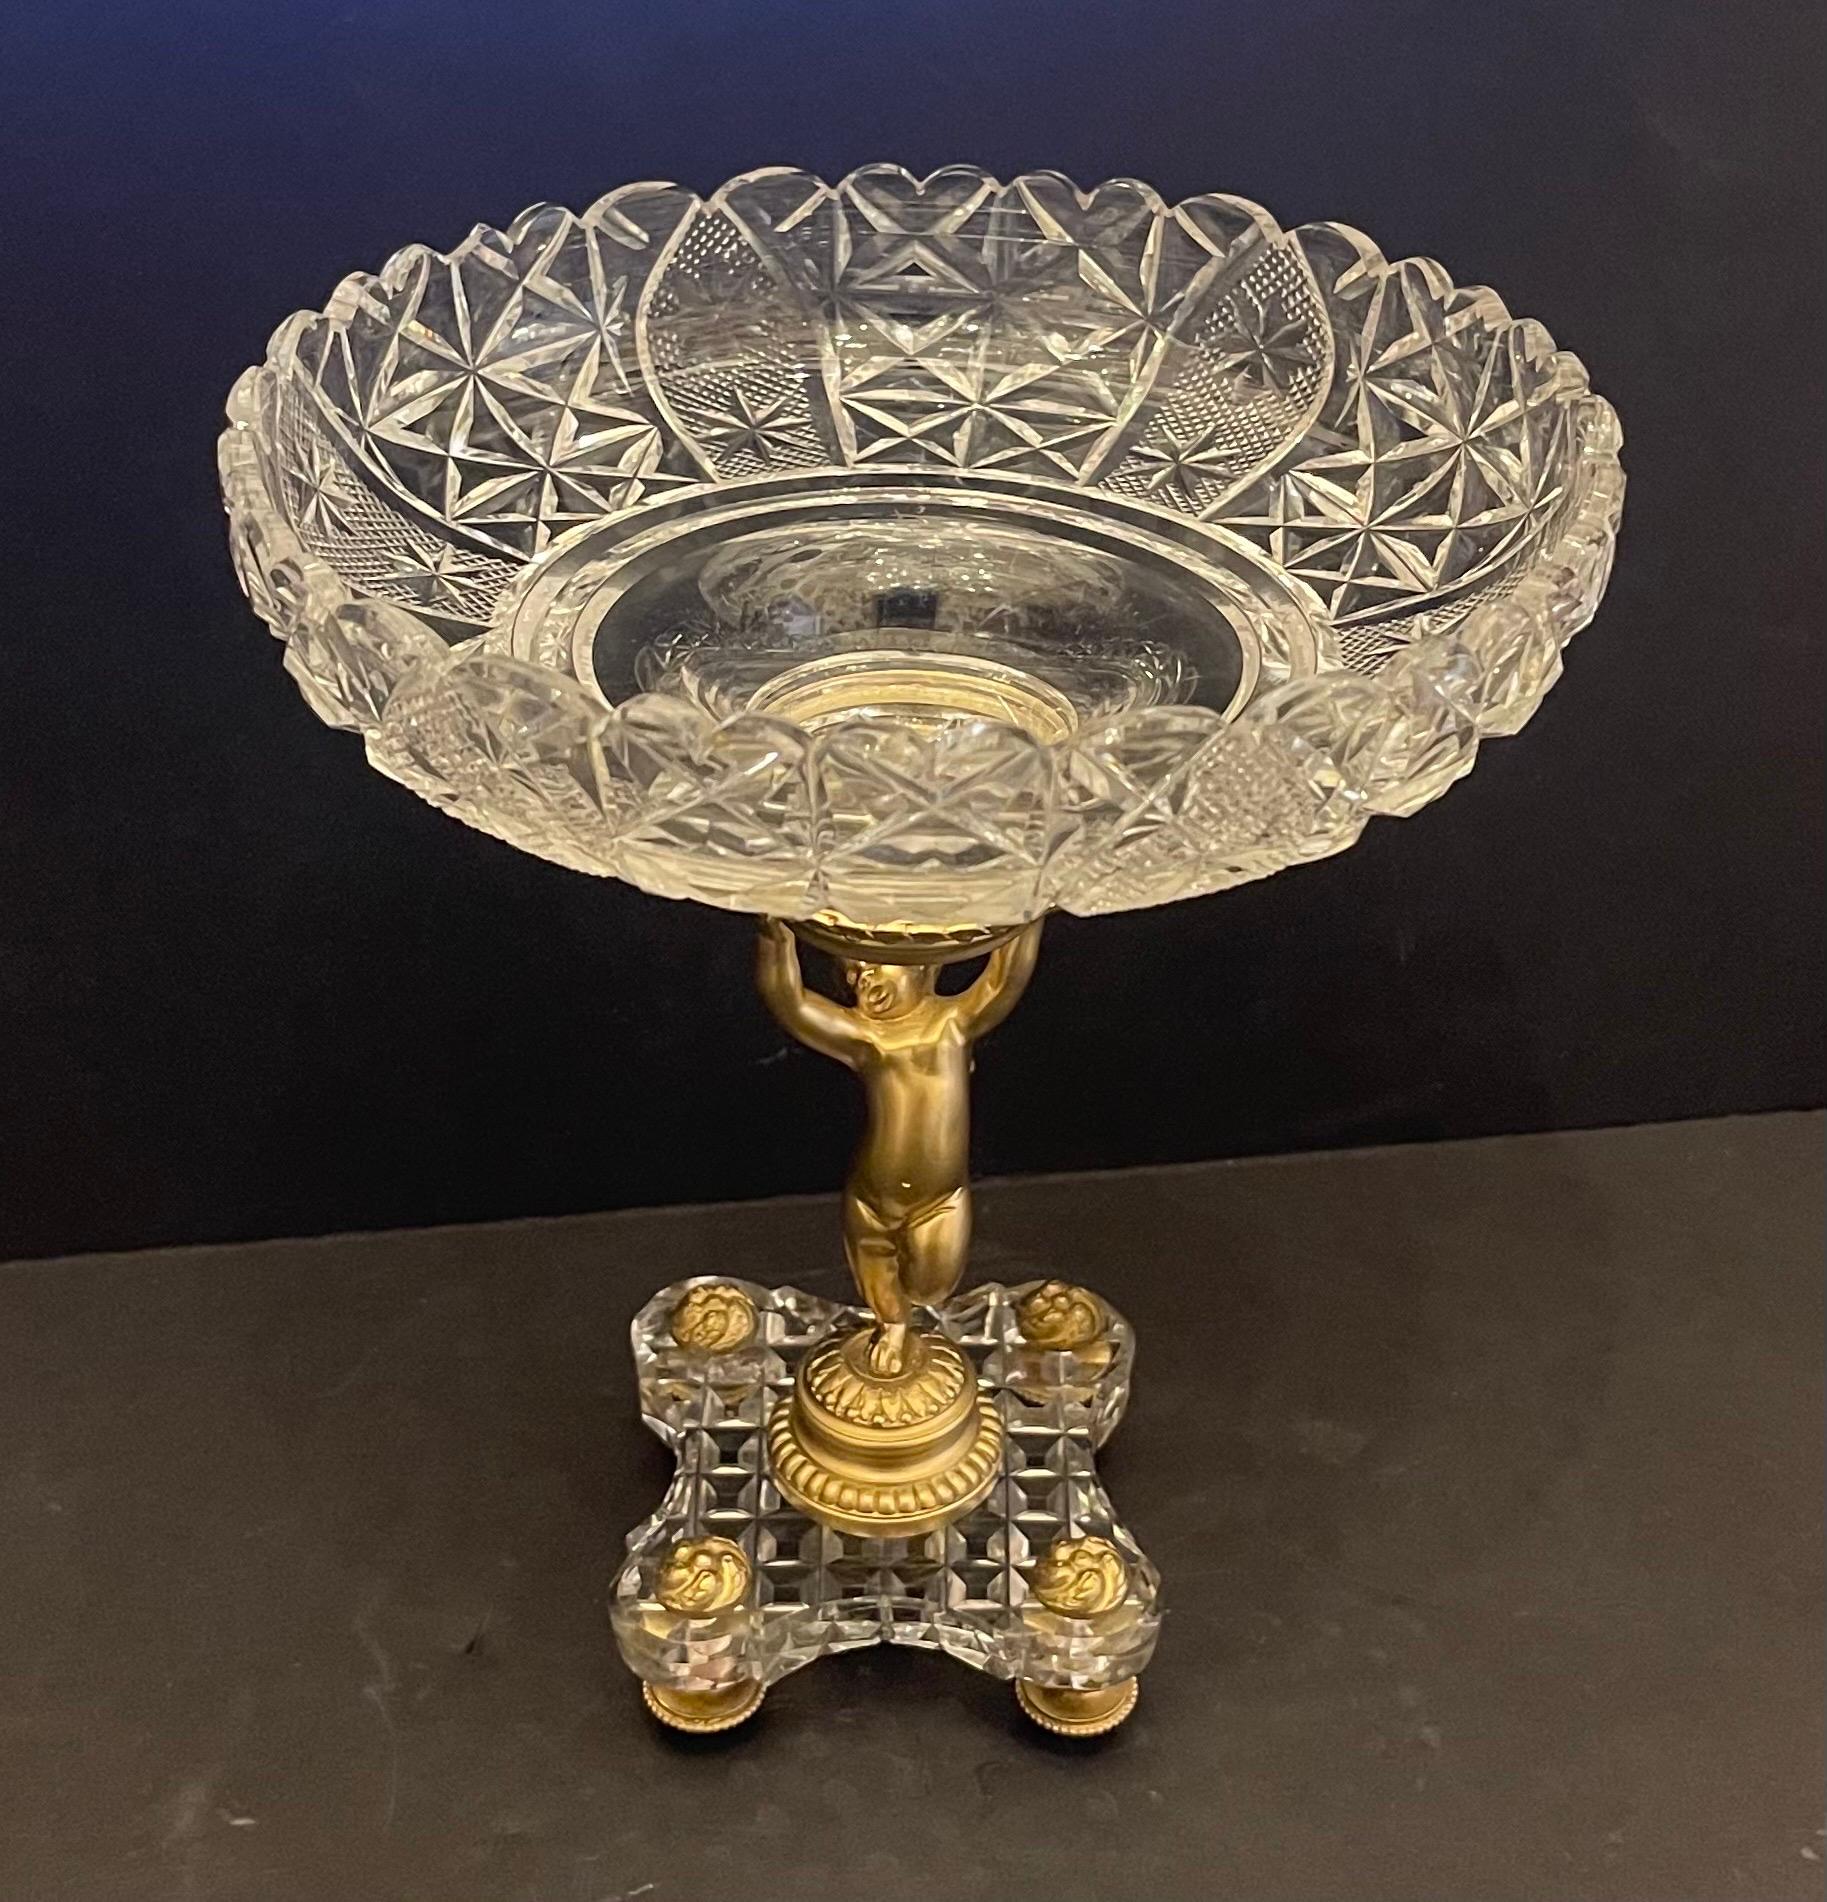 A Wonderful French What We Believe To Be Baccarat Bronze & Crystal Ormolu Cherub / Putti Compote, Centerpiece That Is Depicting A Cherub Holding A Large Cut Crystal Bowl Standing On A Faceted Crystal Base With Four Bronze Feet.